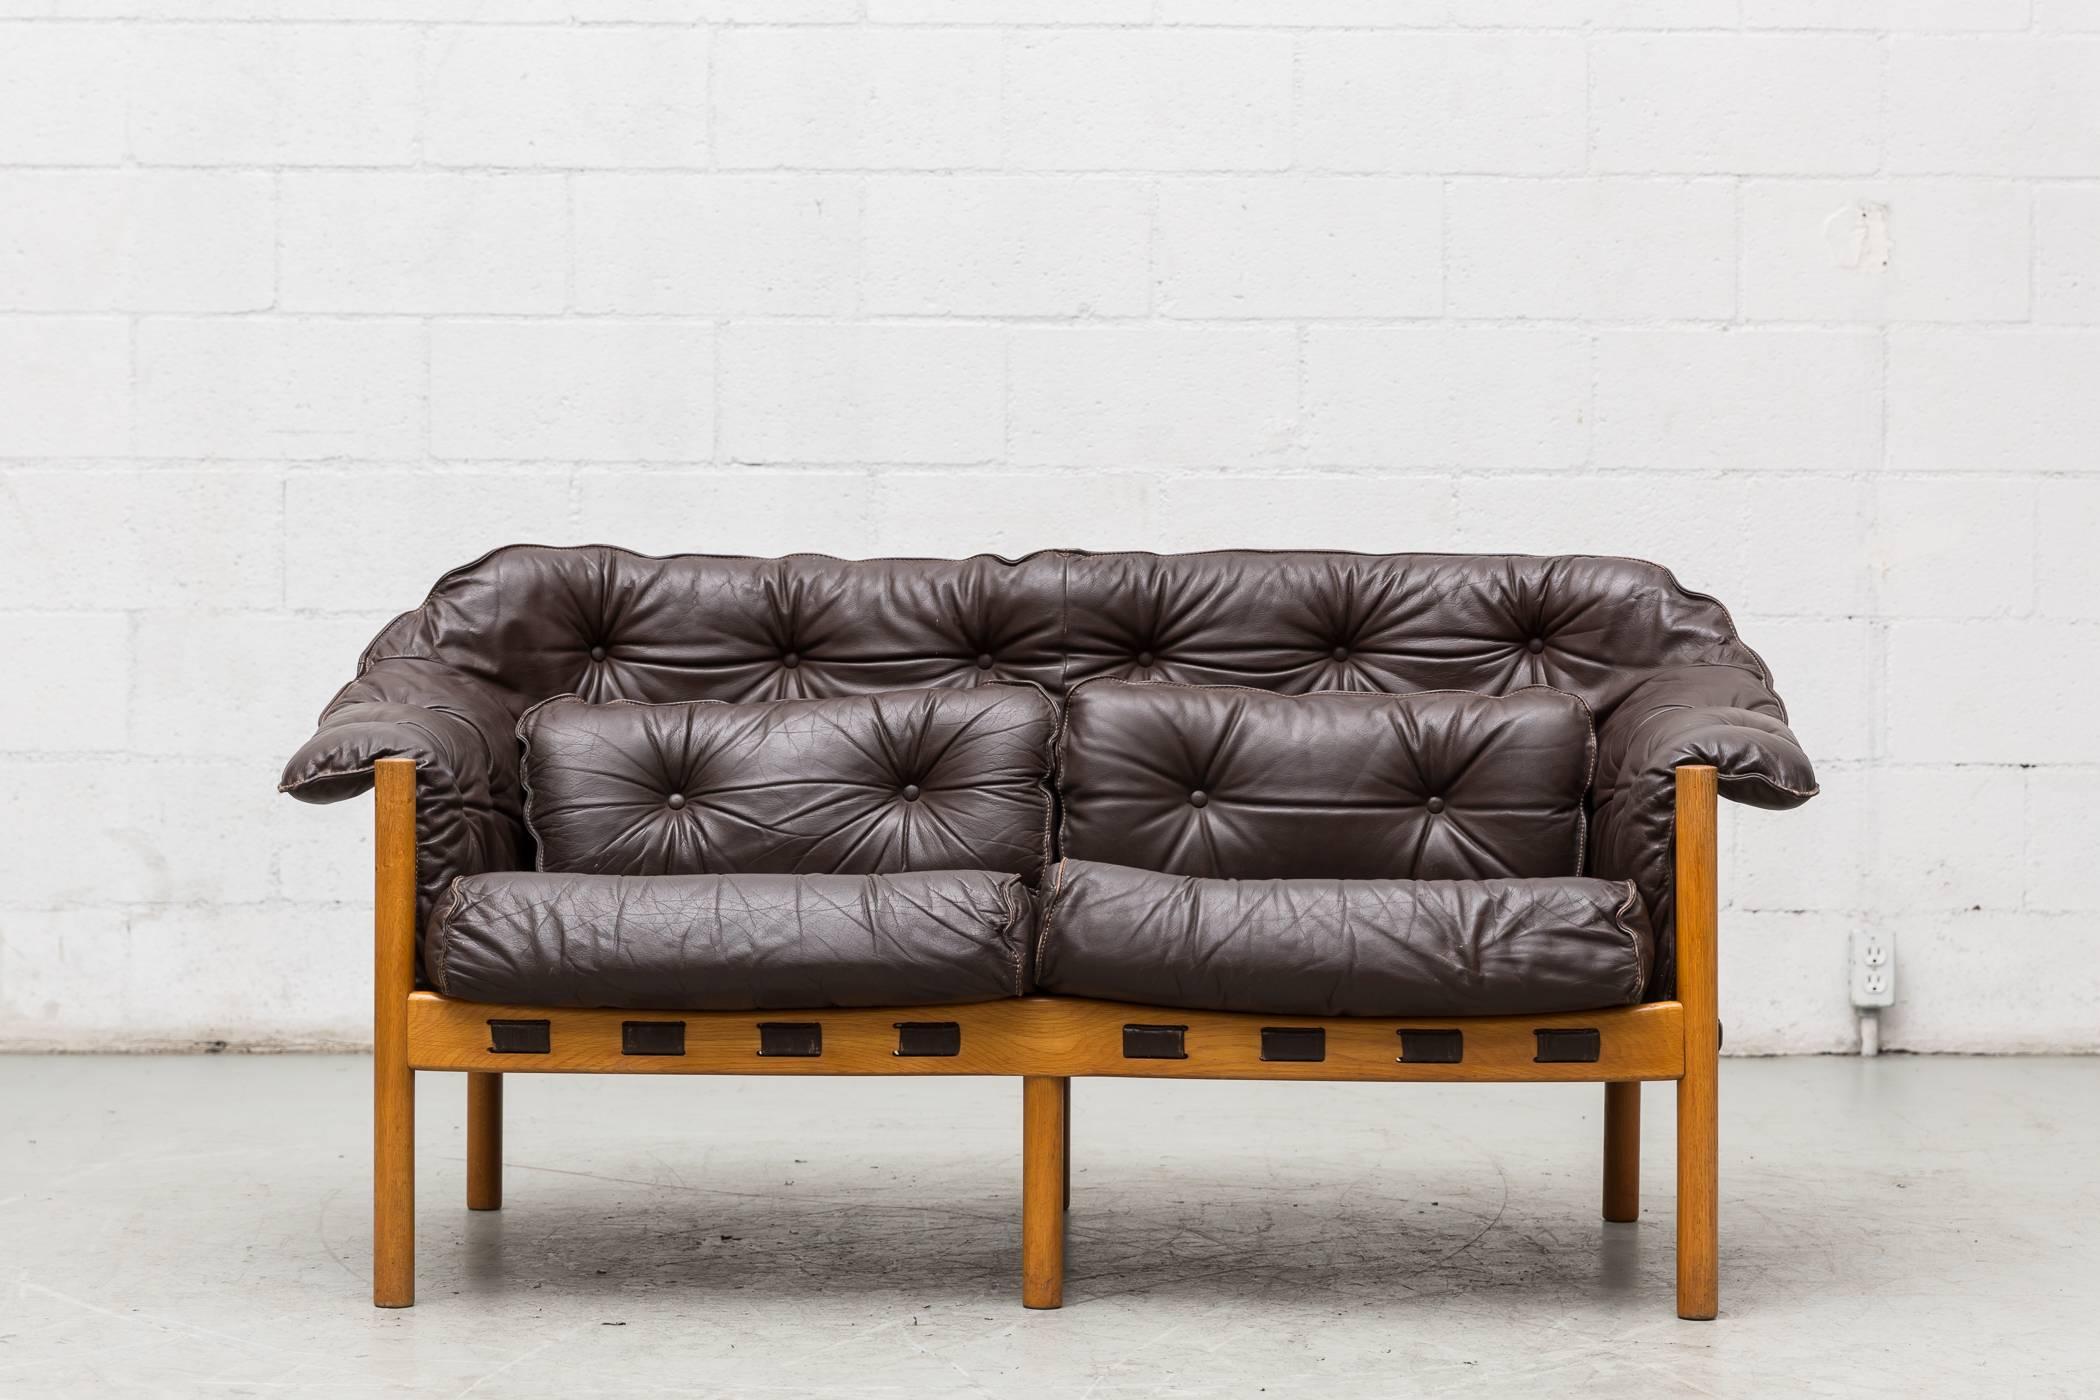 Sweet little Arne Norell style love seat with chocolate brown leather tufted cushions in original condition. Visible signs of wear, some of the lining is worn through behind the leather. Frame in good original condition.